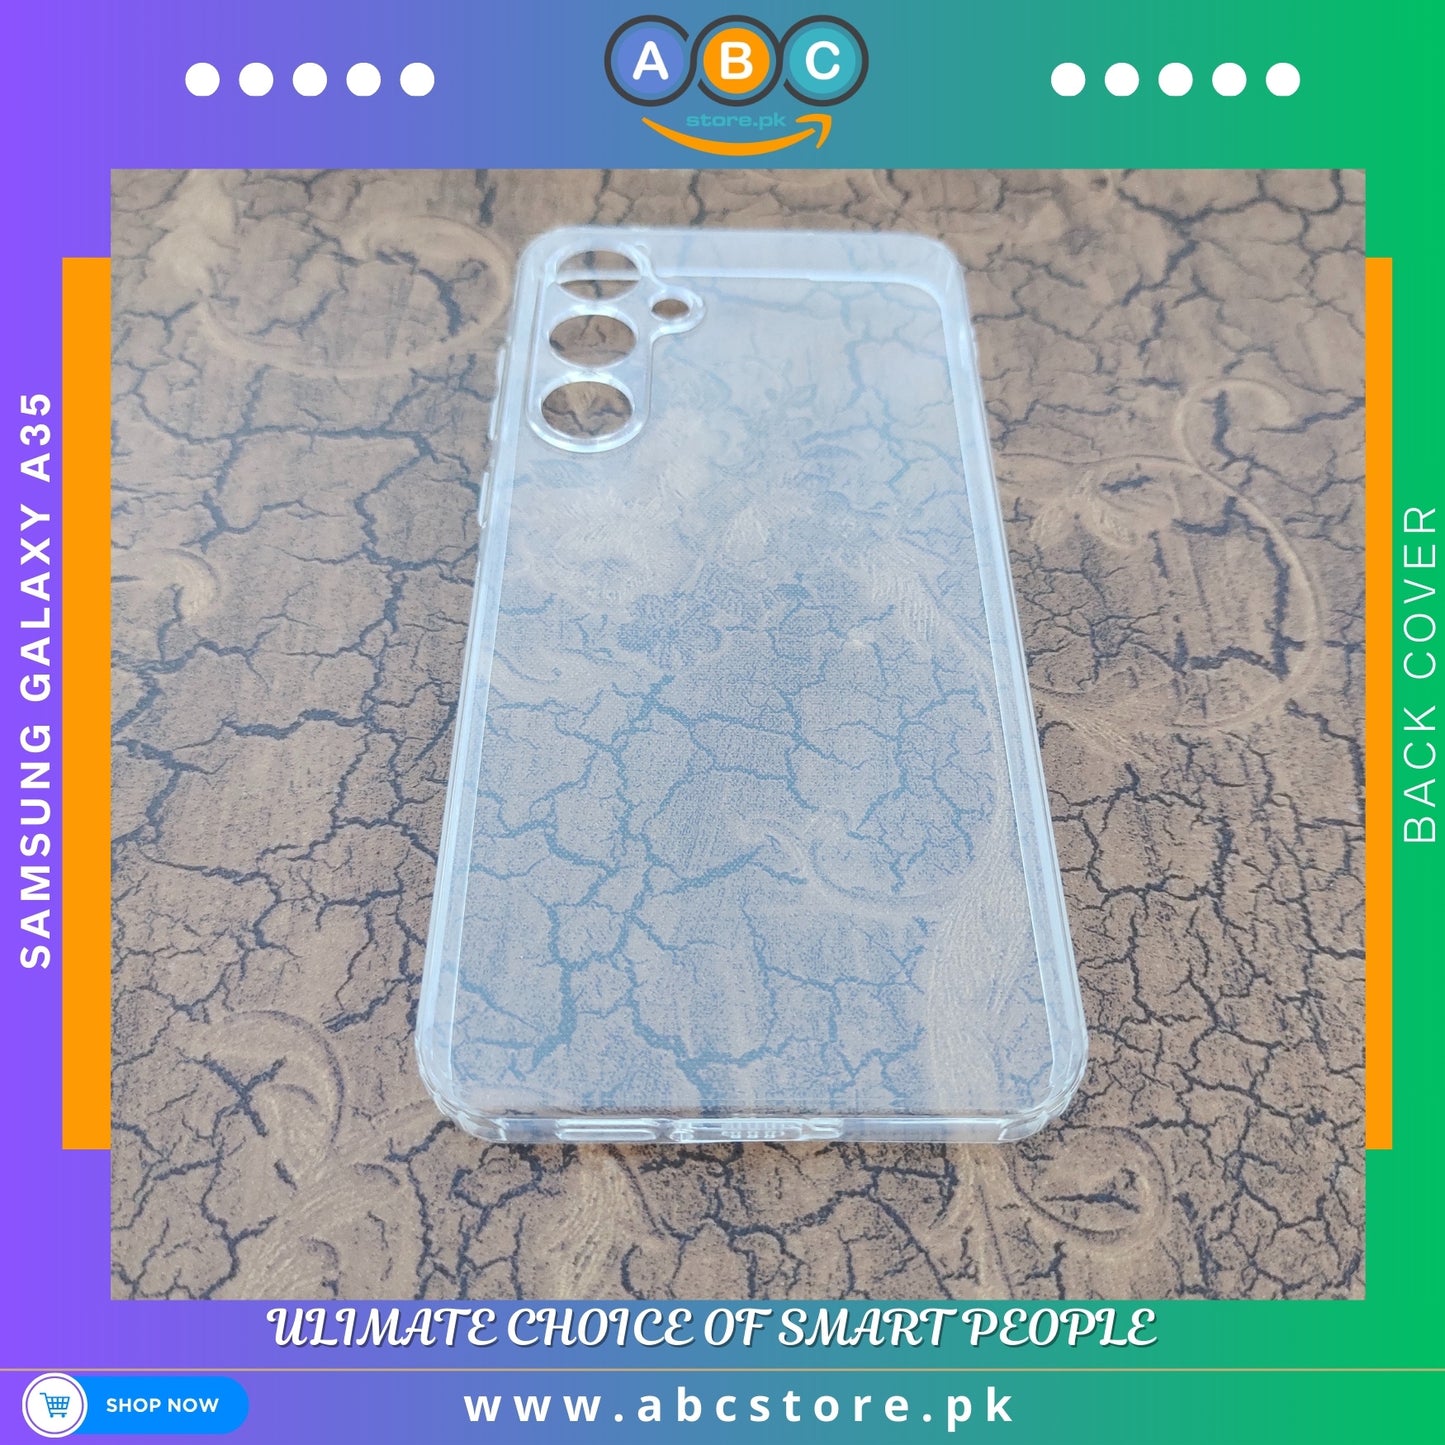 Samsung Galaxy A35 Case, Soft TPU Ultra-Clear with Dust Plugs (NO Corner Bumpers) Back Cover